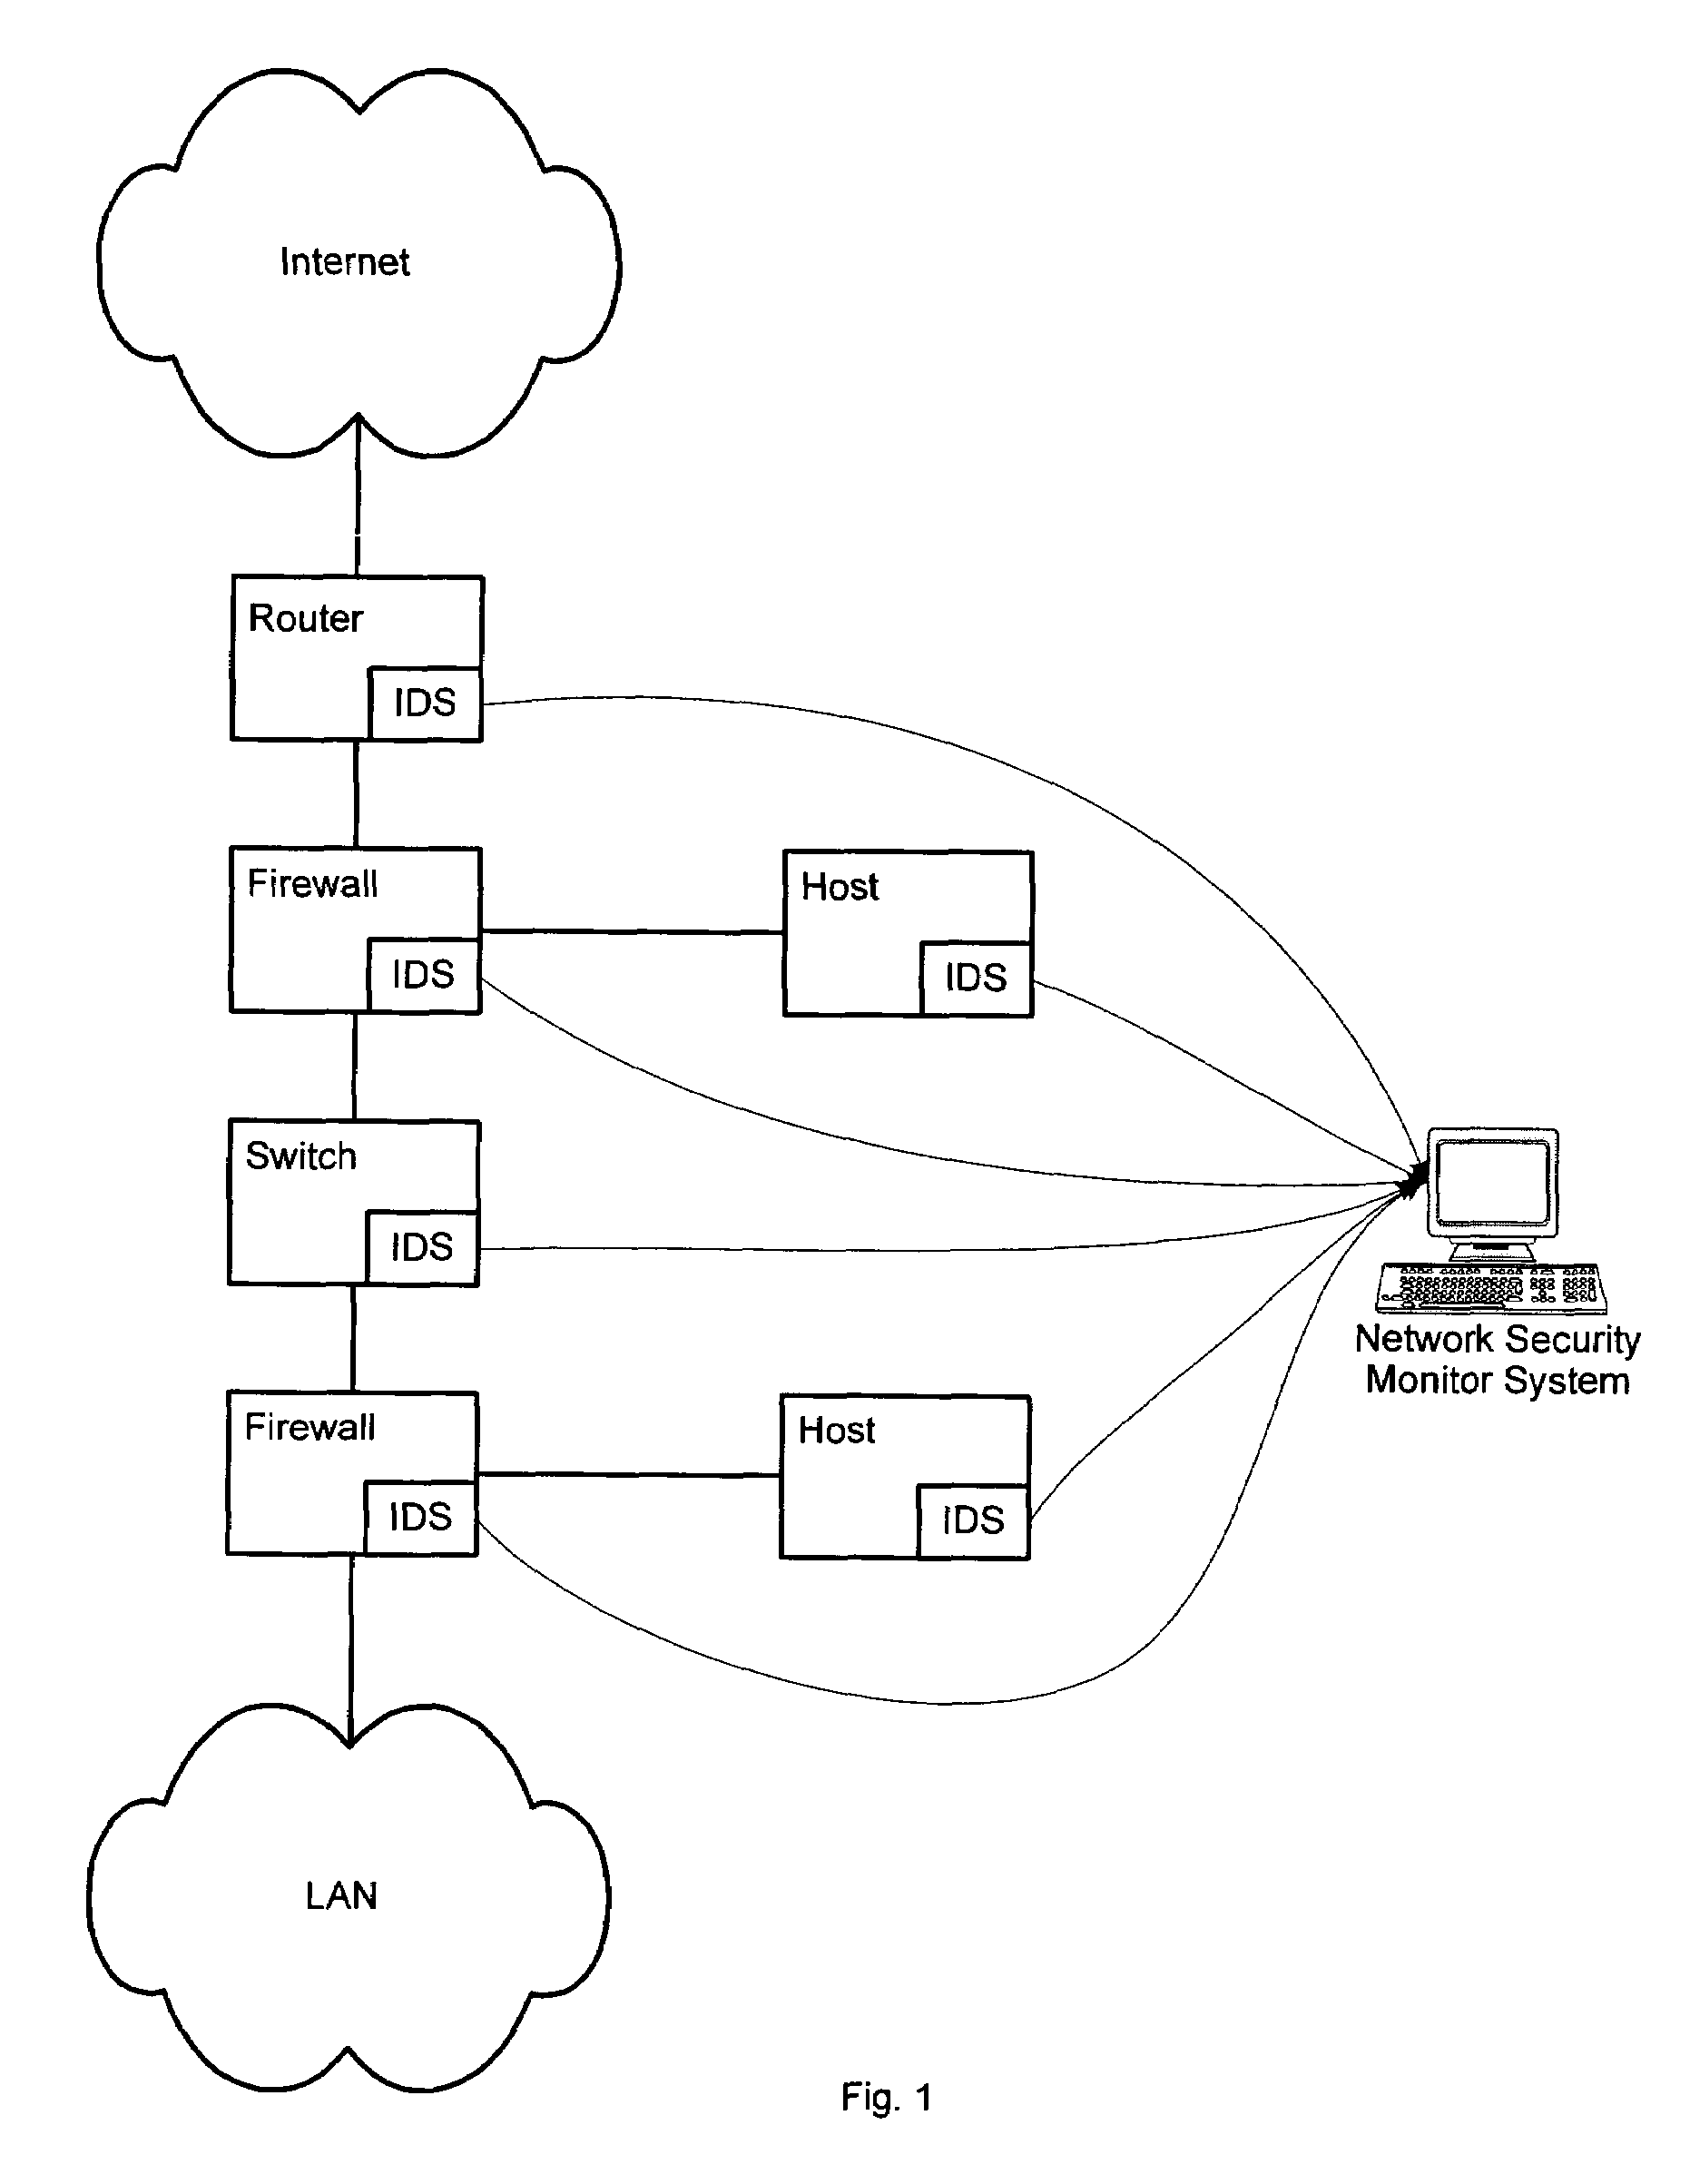 Method and system for displaying network security incidents